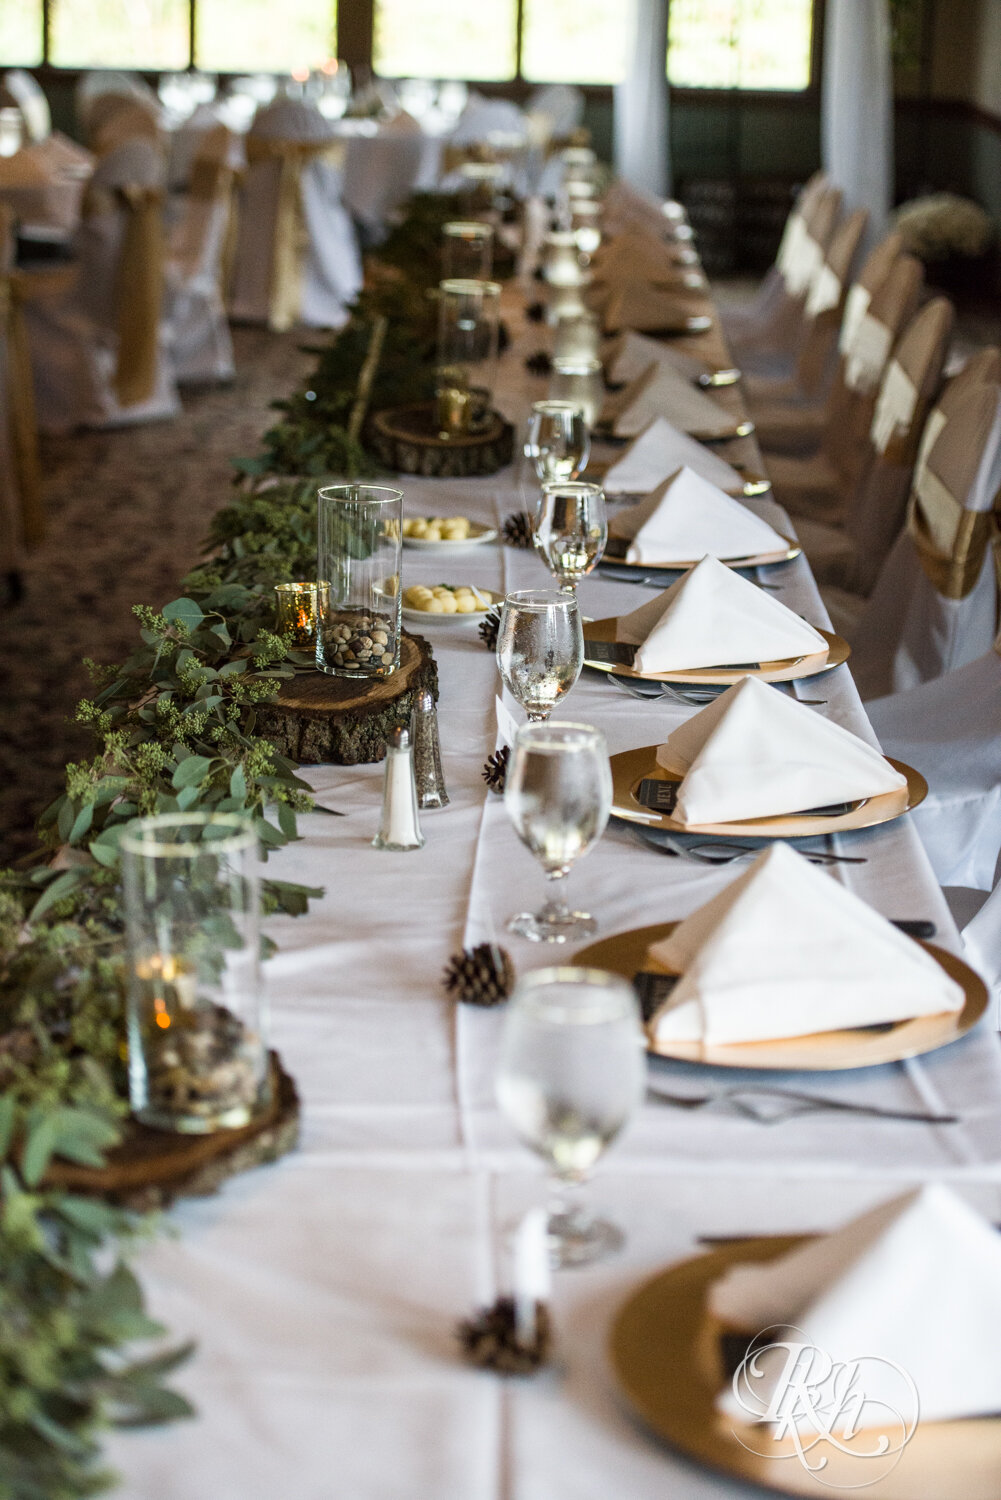 Head table covered in greens